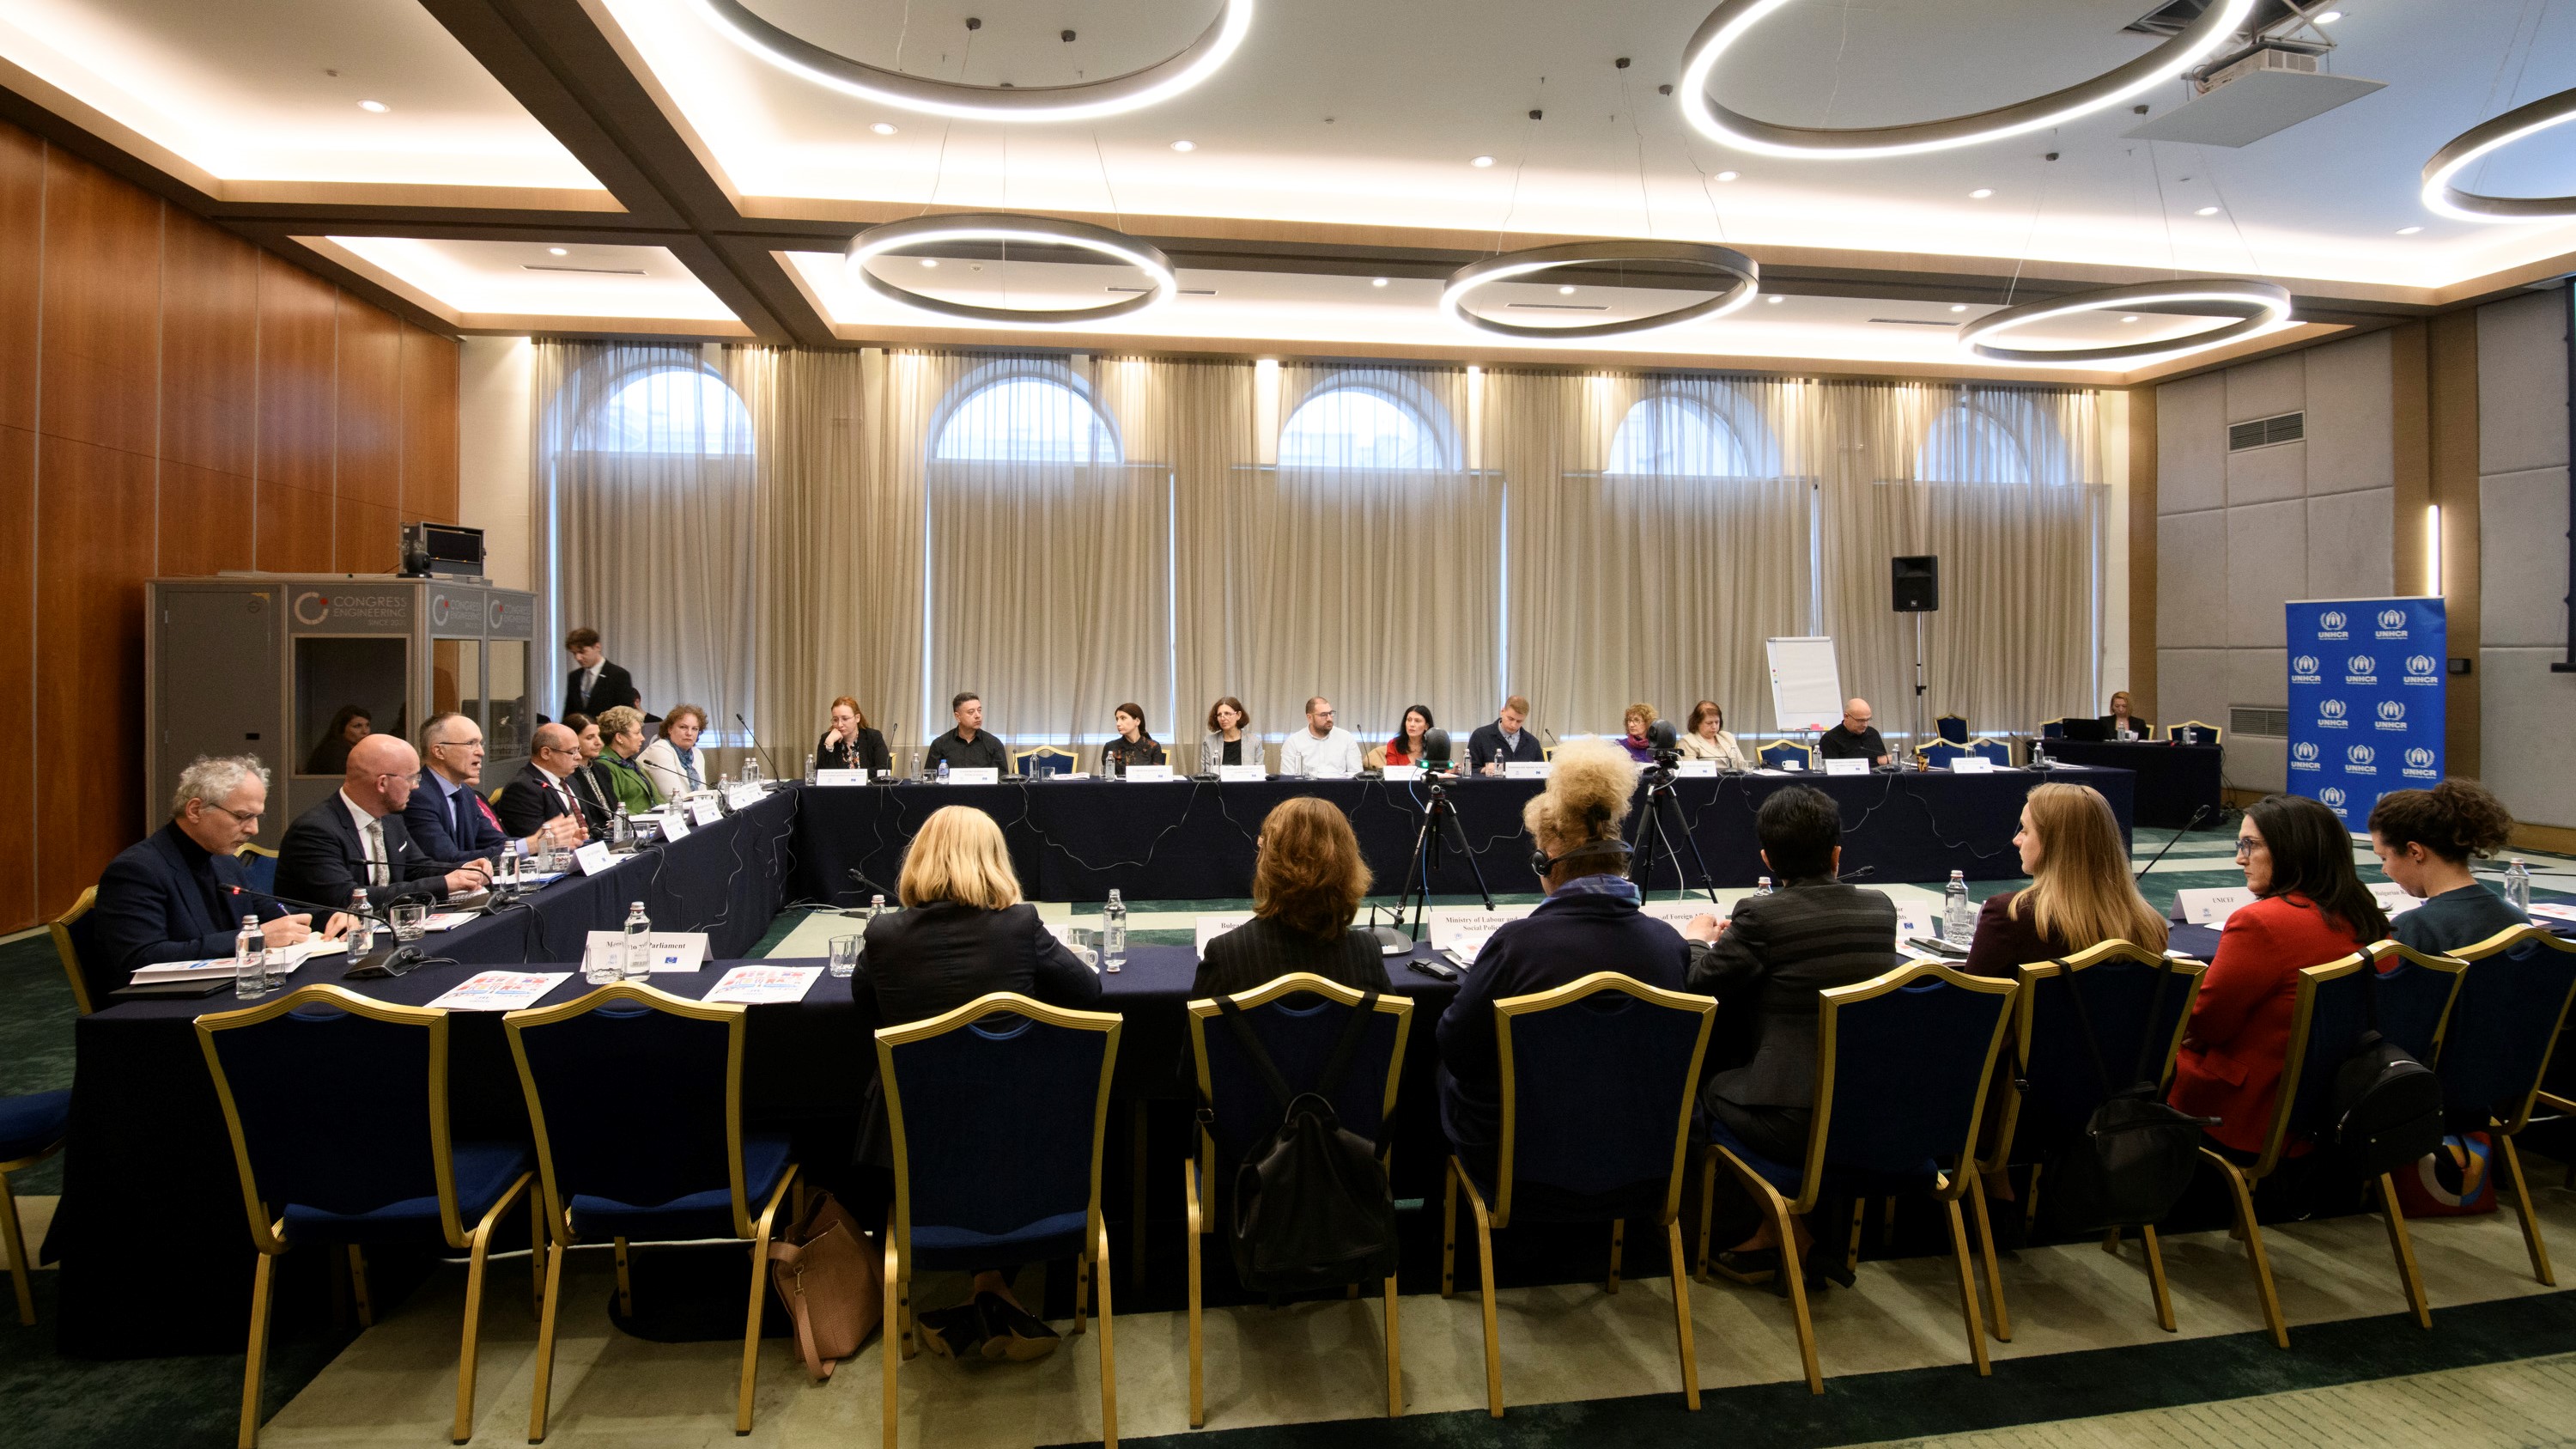 SRSG takes part in Council of Europe/UNHCR roundtable in Sofia